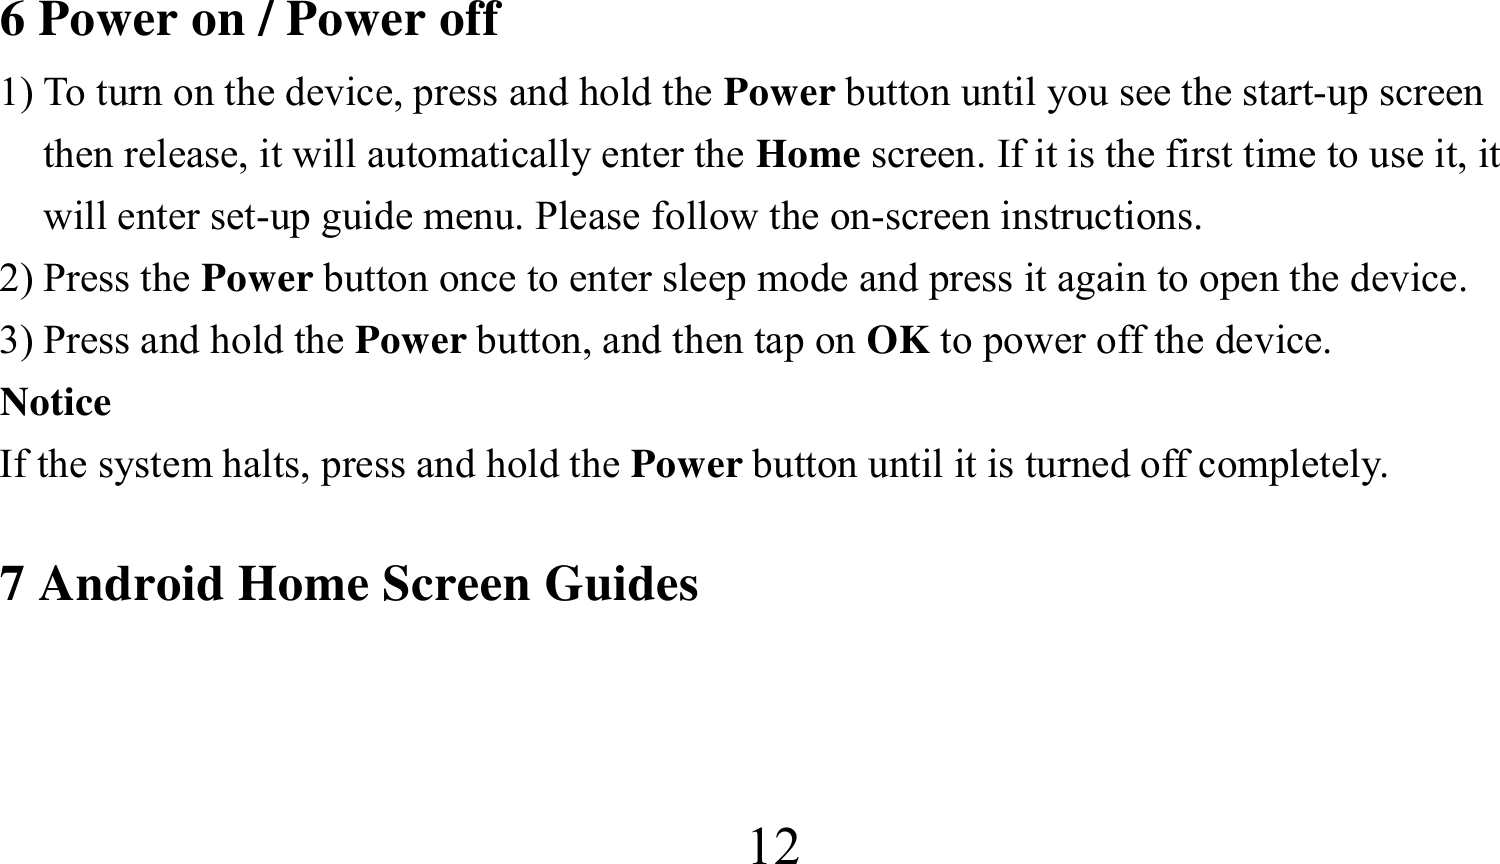  126 Power on / Power off 1) To turn on the device, press and hold the Power button until you see the start-up screen then release, it will automatically enter the Home screen. If it is the first time to use it, it will enter set-up guide menu. Please follow the on-screen instructions. 2) Press the Power button once to enter sleep mode and press it again to open the device. 3) Press and hold the Power button, and then tap on OK to power off the device. Notice If the system halts, press and hold the Power button until it is turned off completely.  7 Android Home Screen Guides    